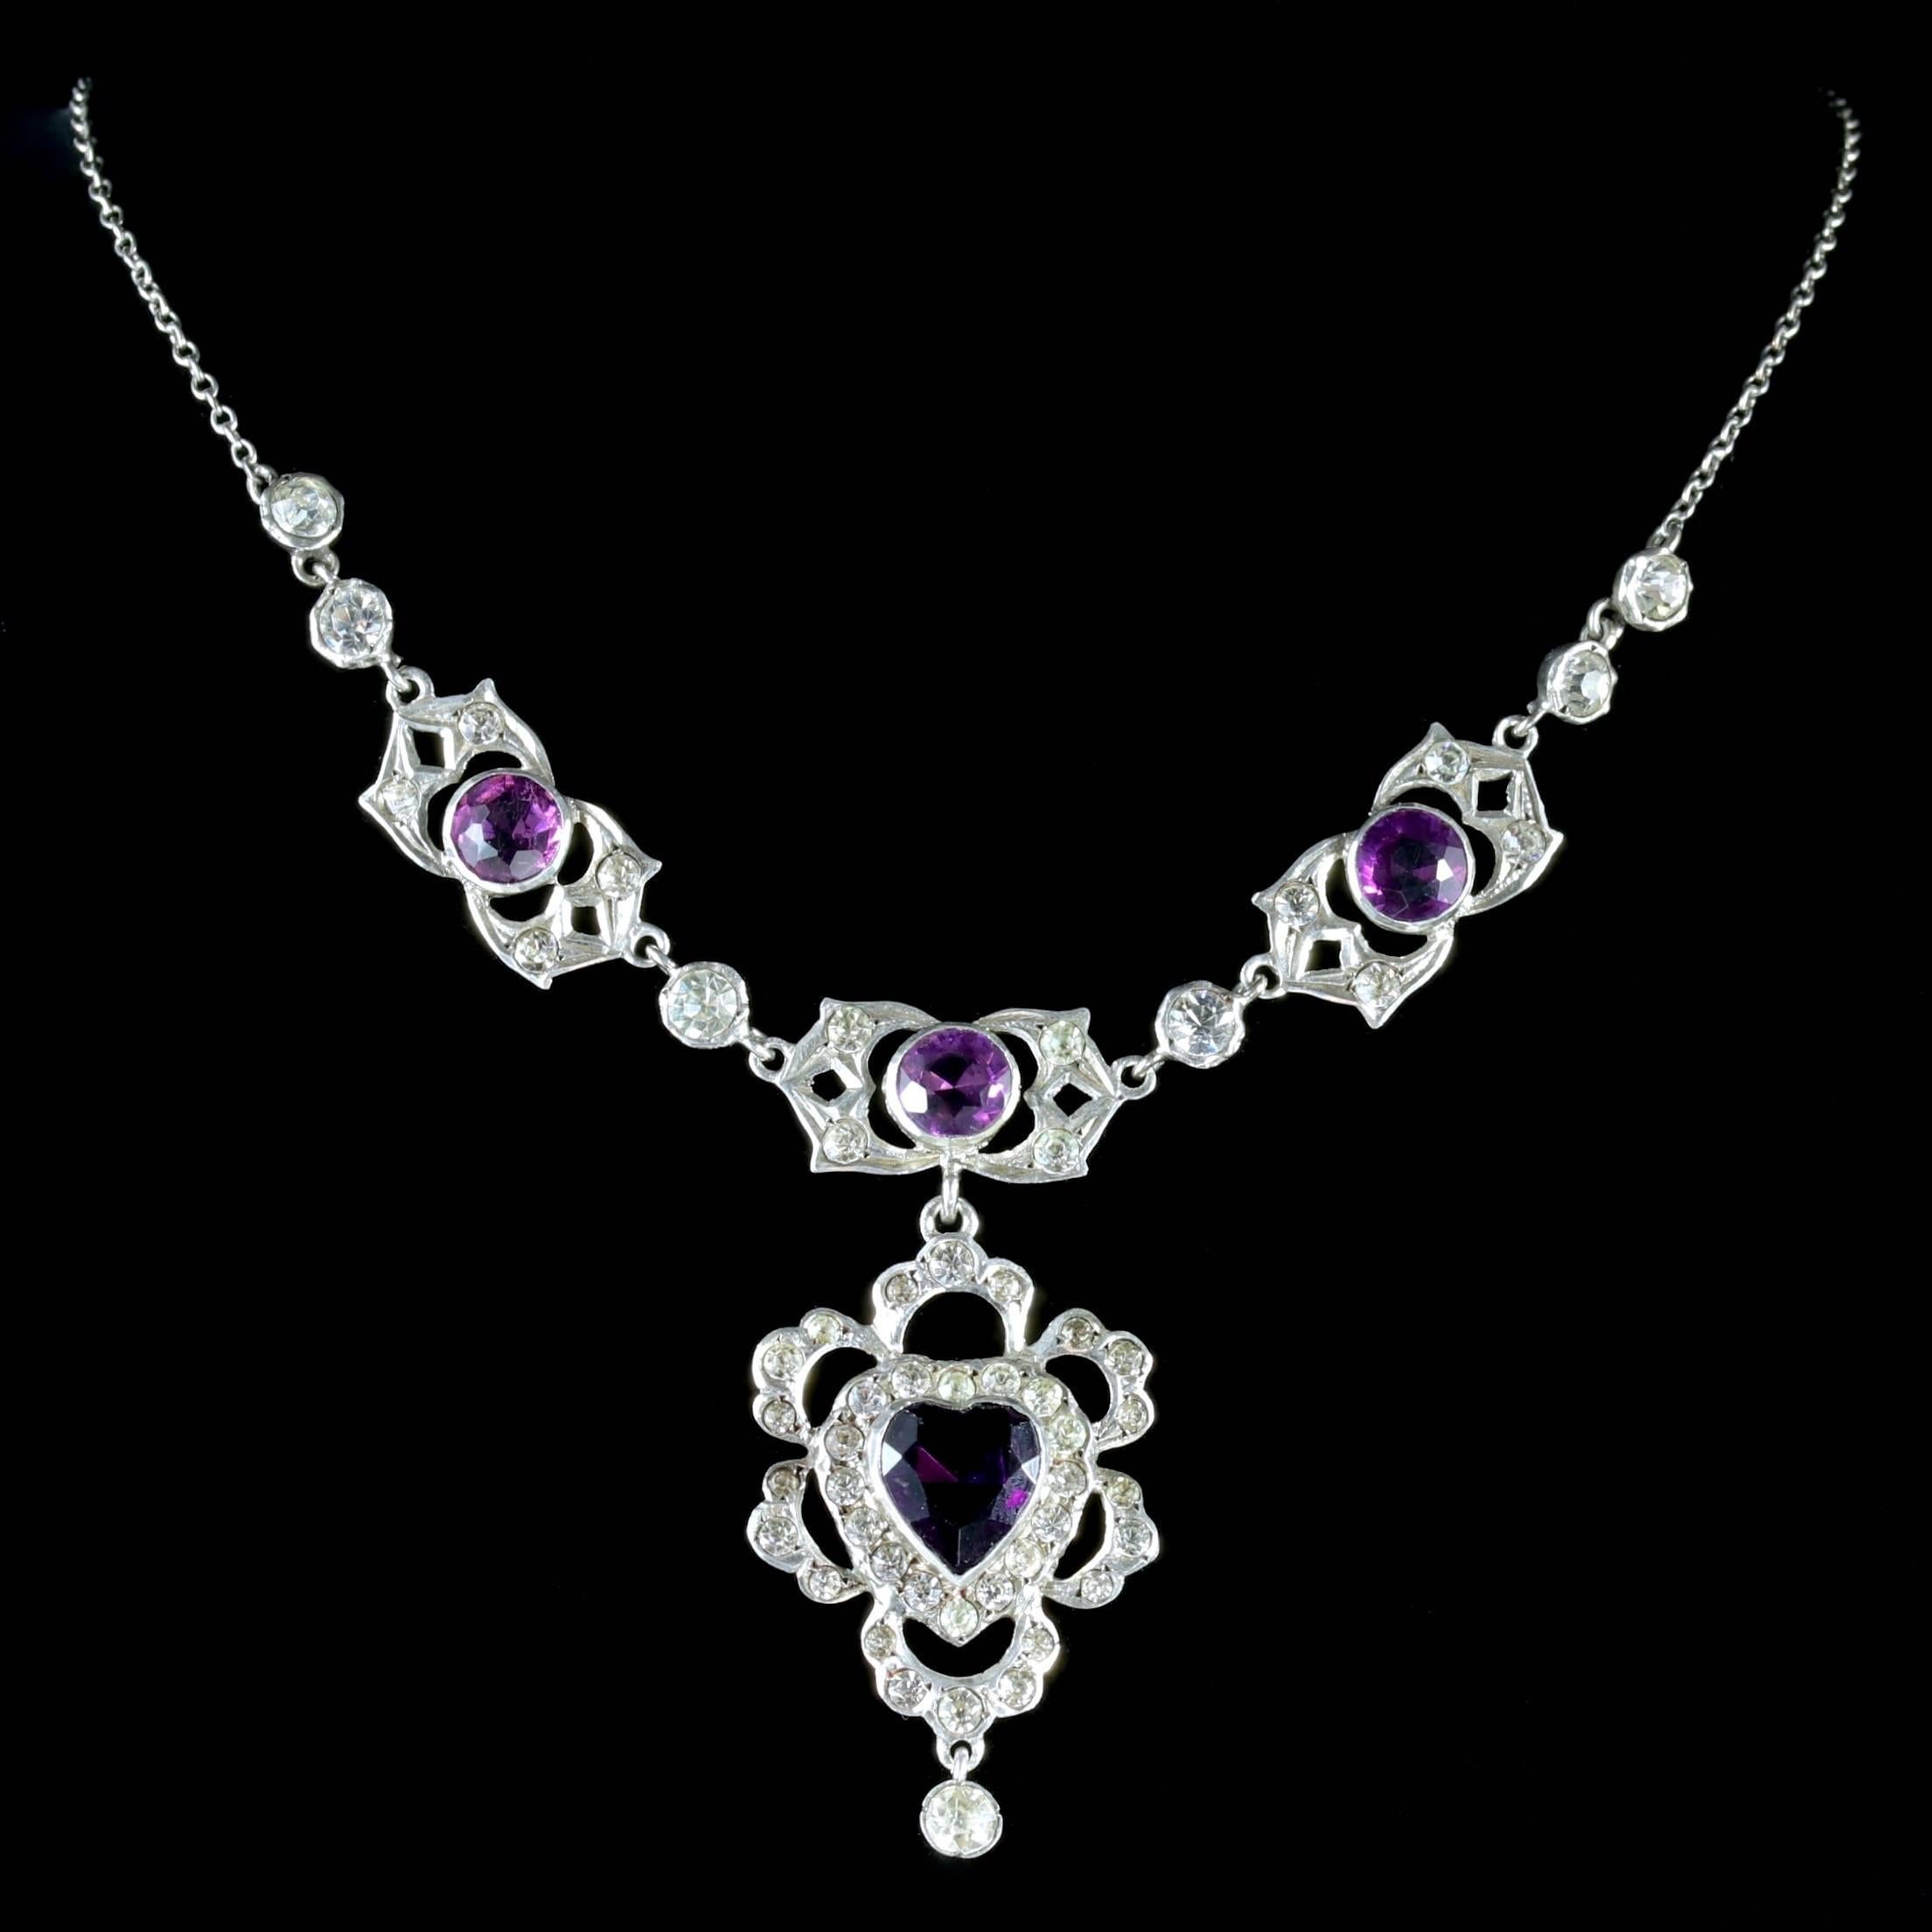 To read more please click continue reading below-

This fabulous antique Silver and Paste Lavaliere Necklace is genuine Victorian Circa 1900. 

The beautiful necklace is decorated with sparkling white and Purple Paste stones leading to a pretty